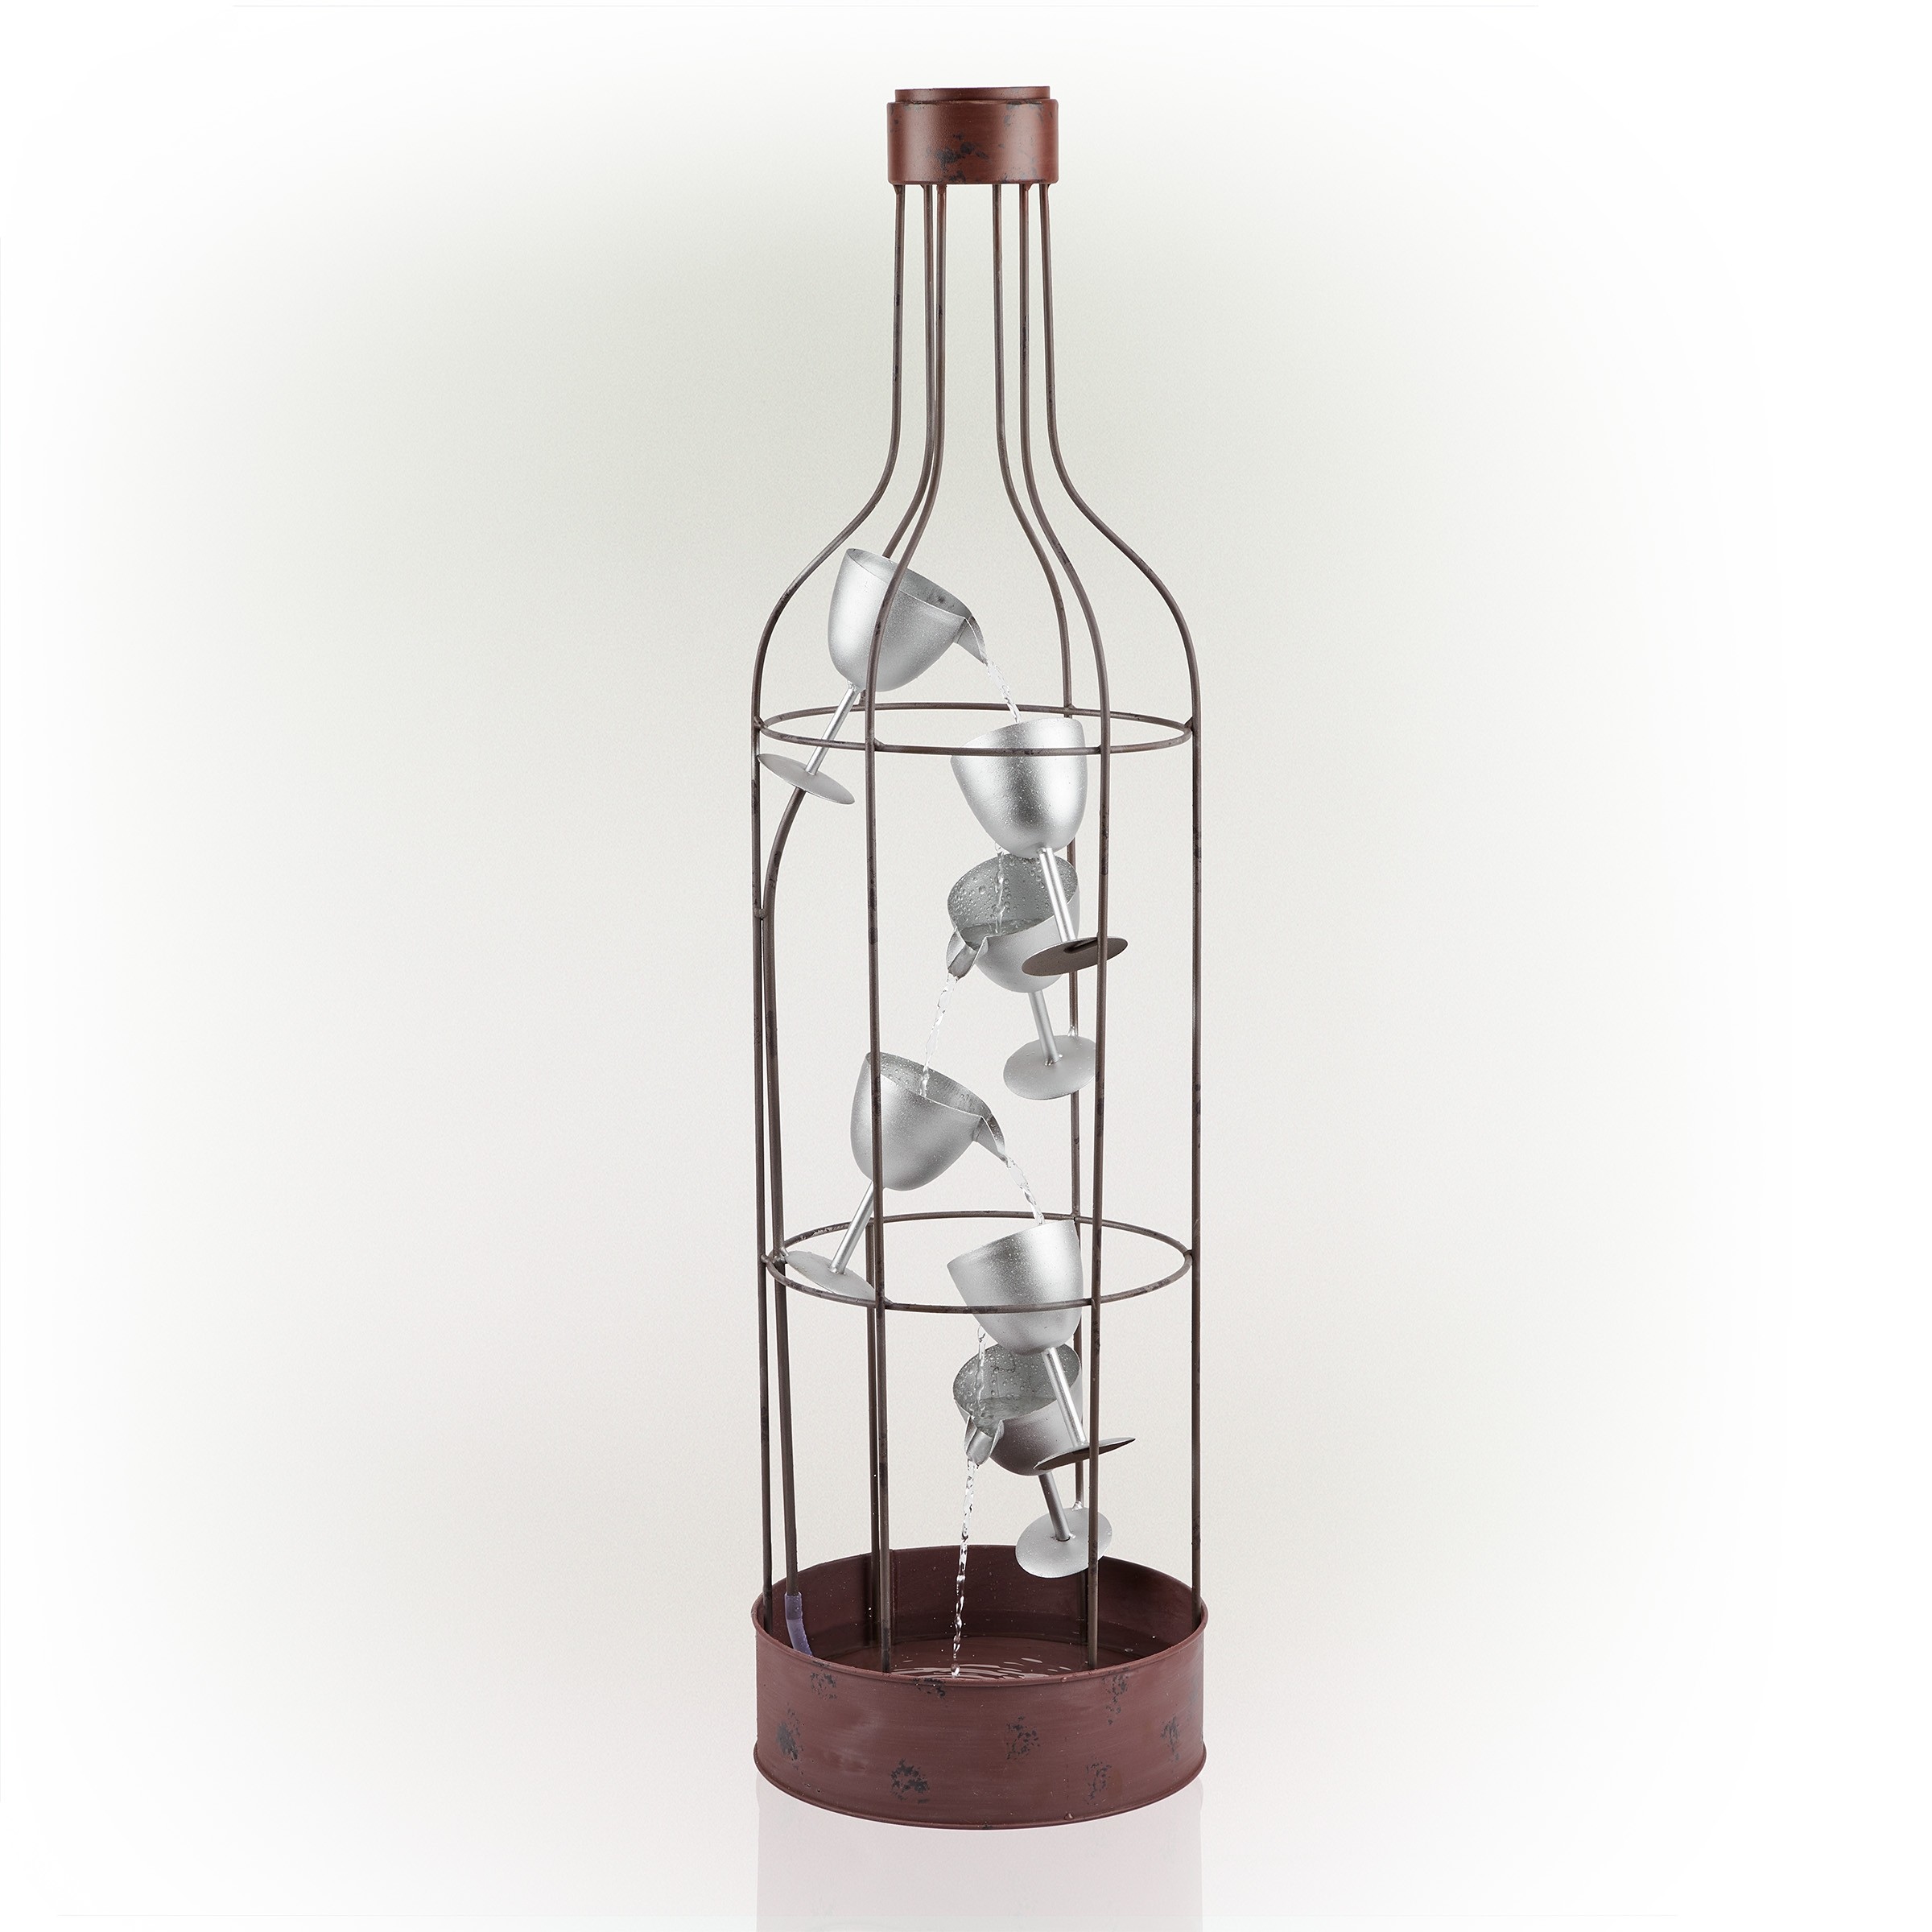 Bottle Shaped Fountain with Tiering Wine Glasses